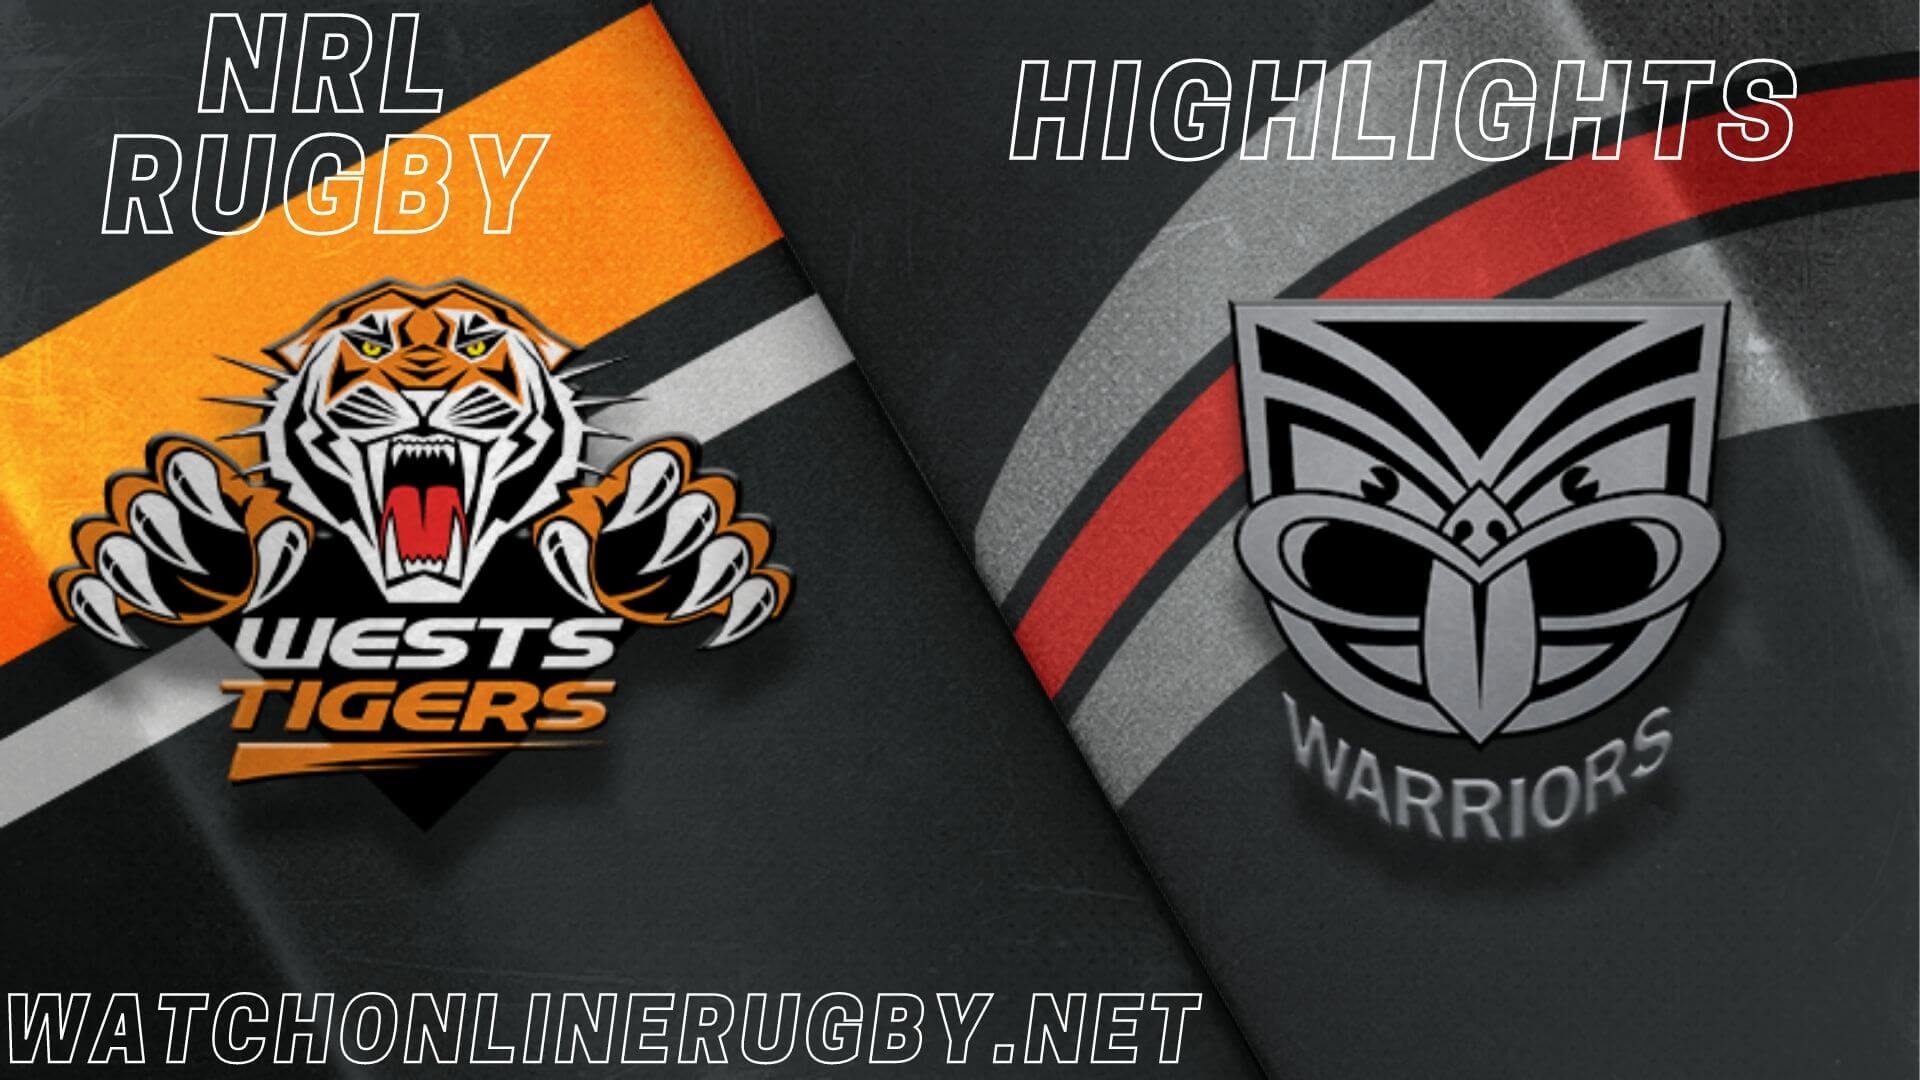 Wests Tigers Vs Warriors Highlights RD 3 NRL Rugby